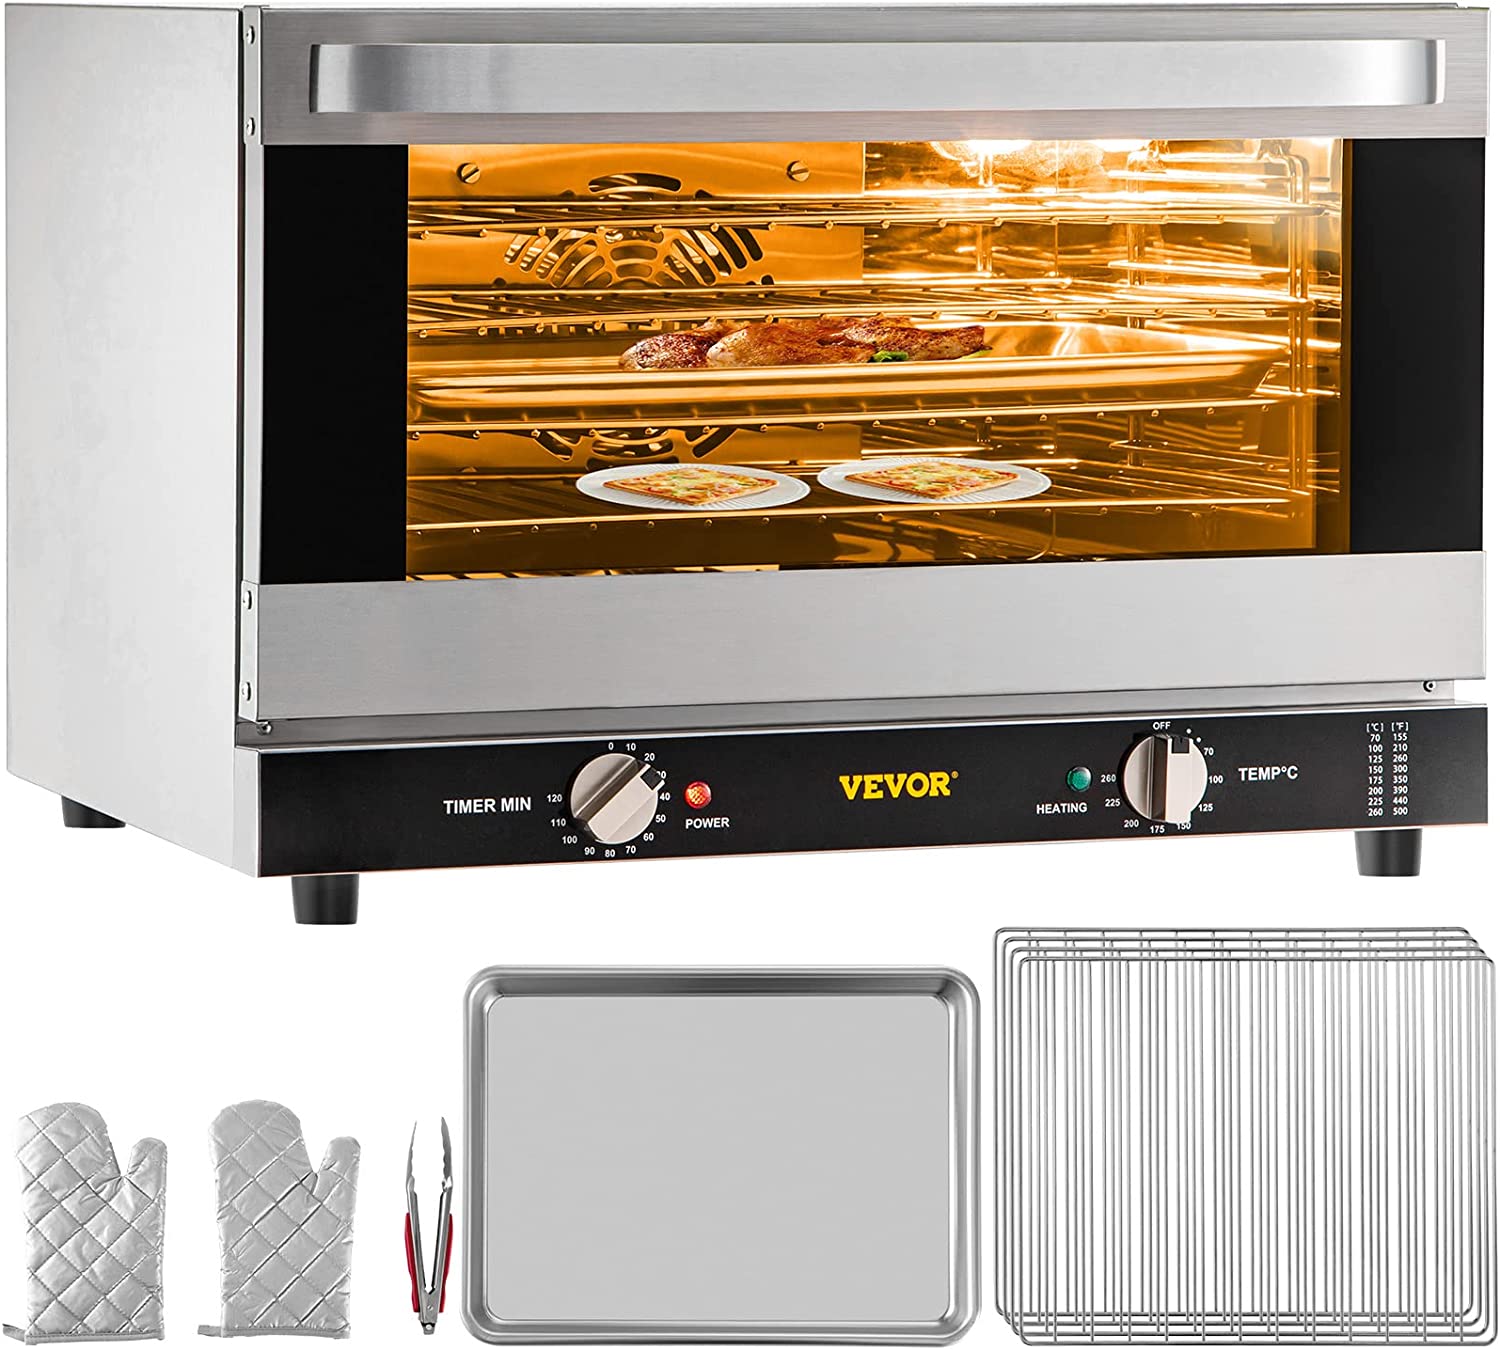 VEVOR Commercial Convection Oven, 47L 43Qt, Half-Size Conventional Oven Countertop, 1600W 4-Tier Toaster